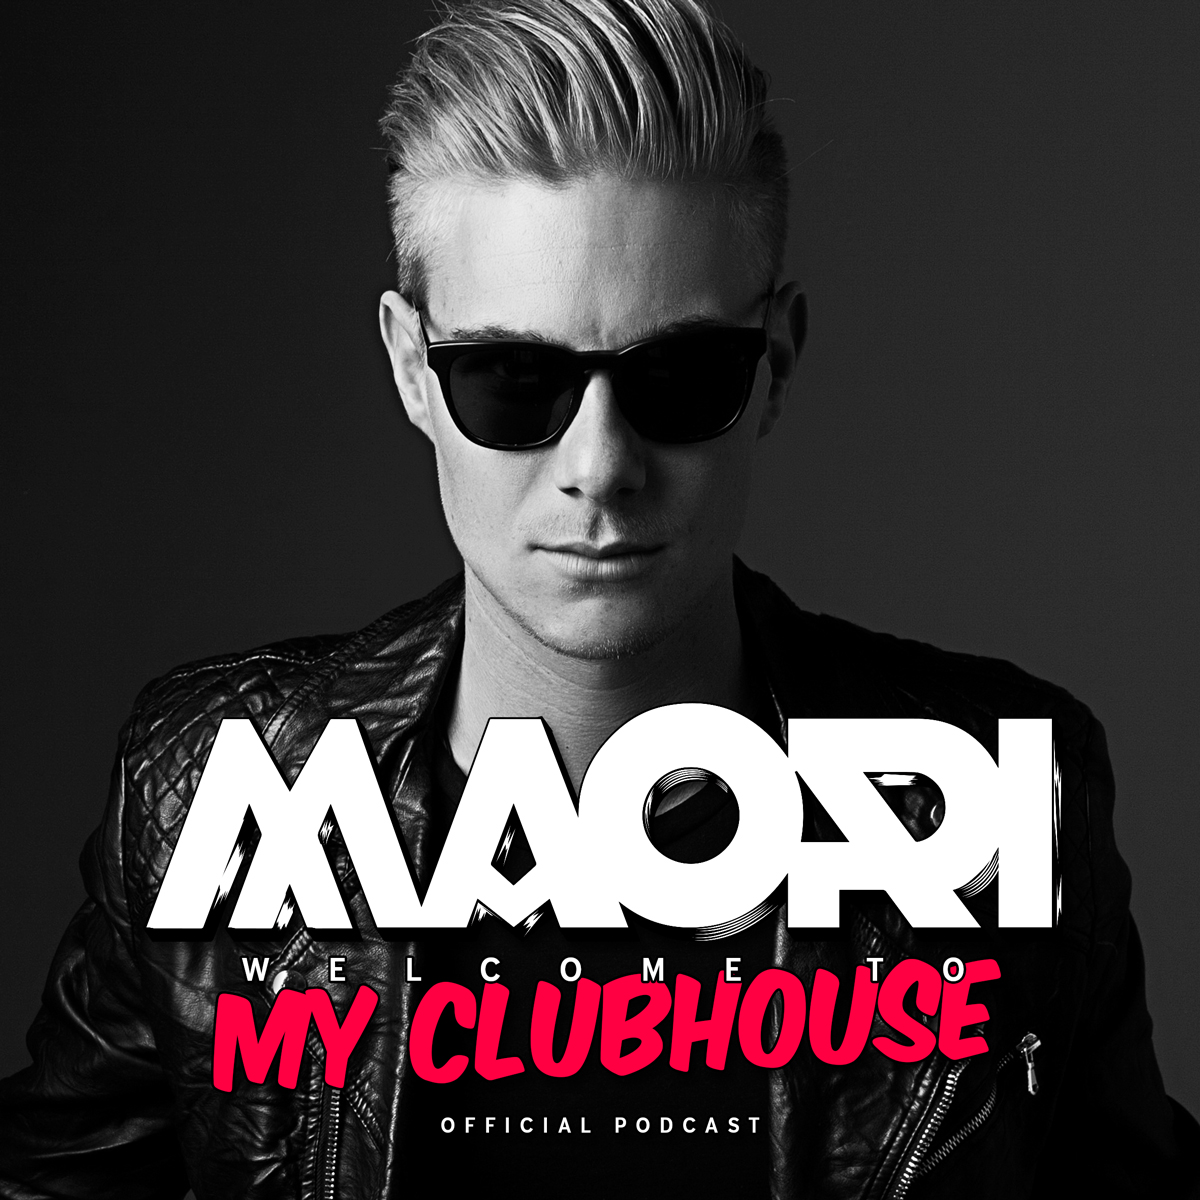 My Clubhouse by Maori - Podcast #019